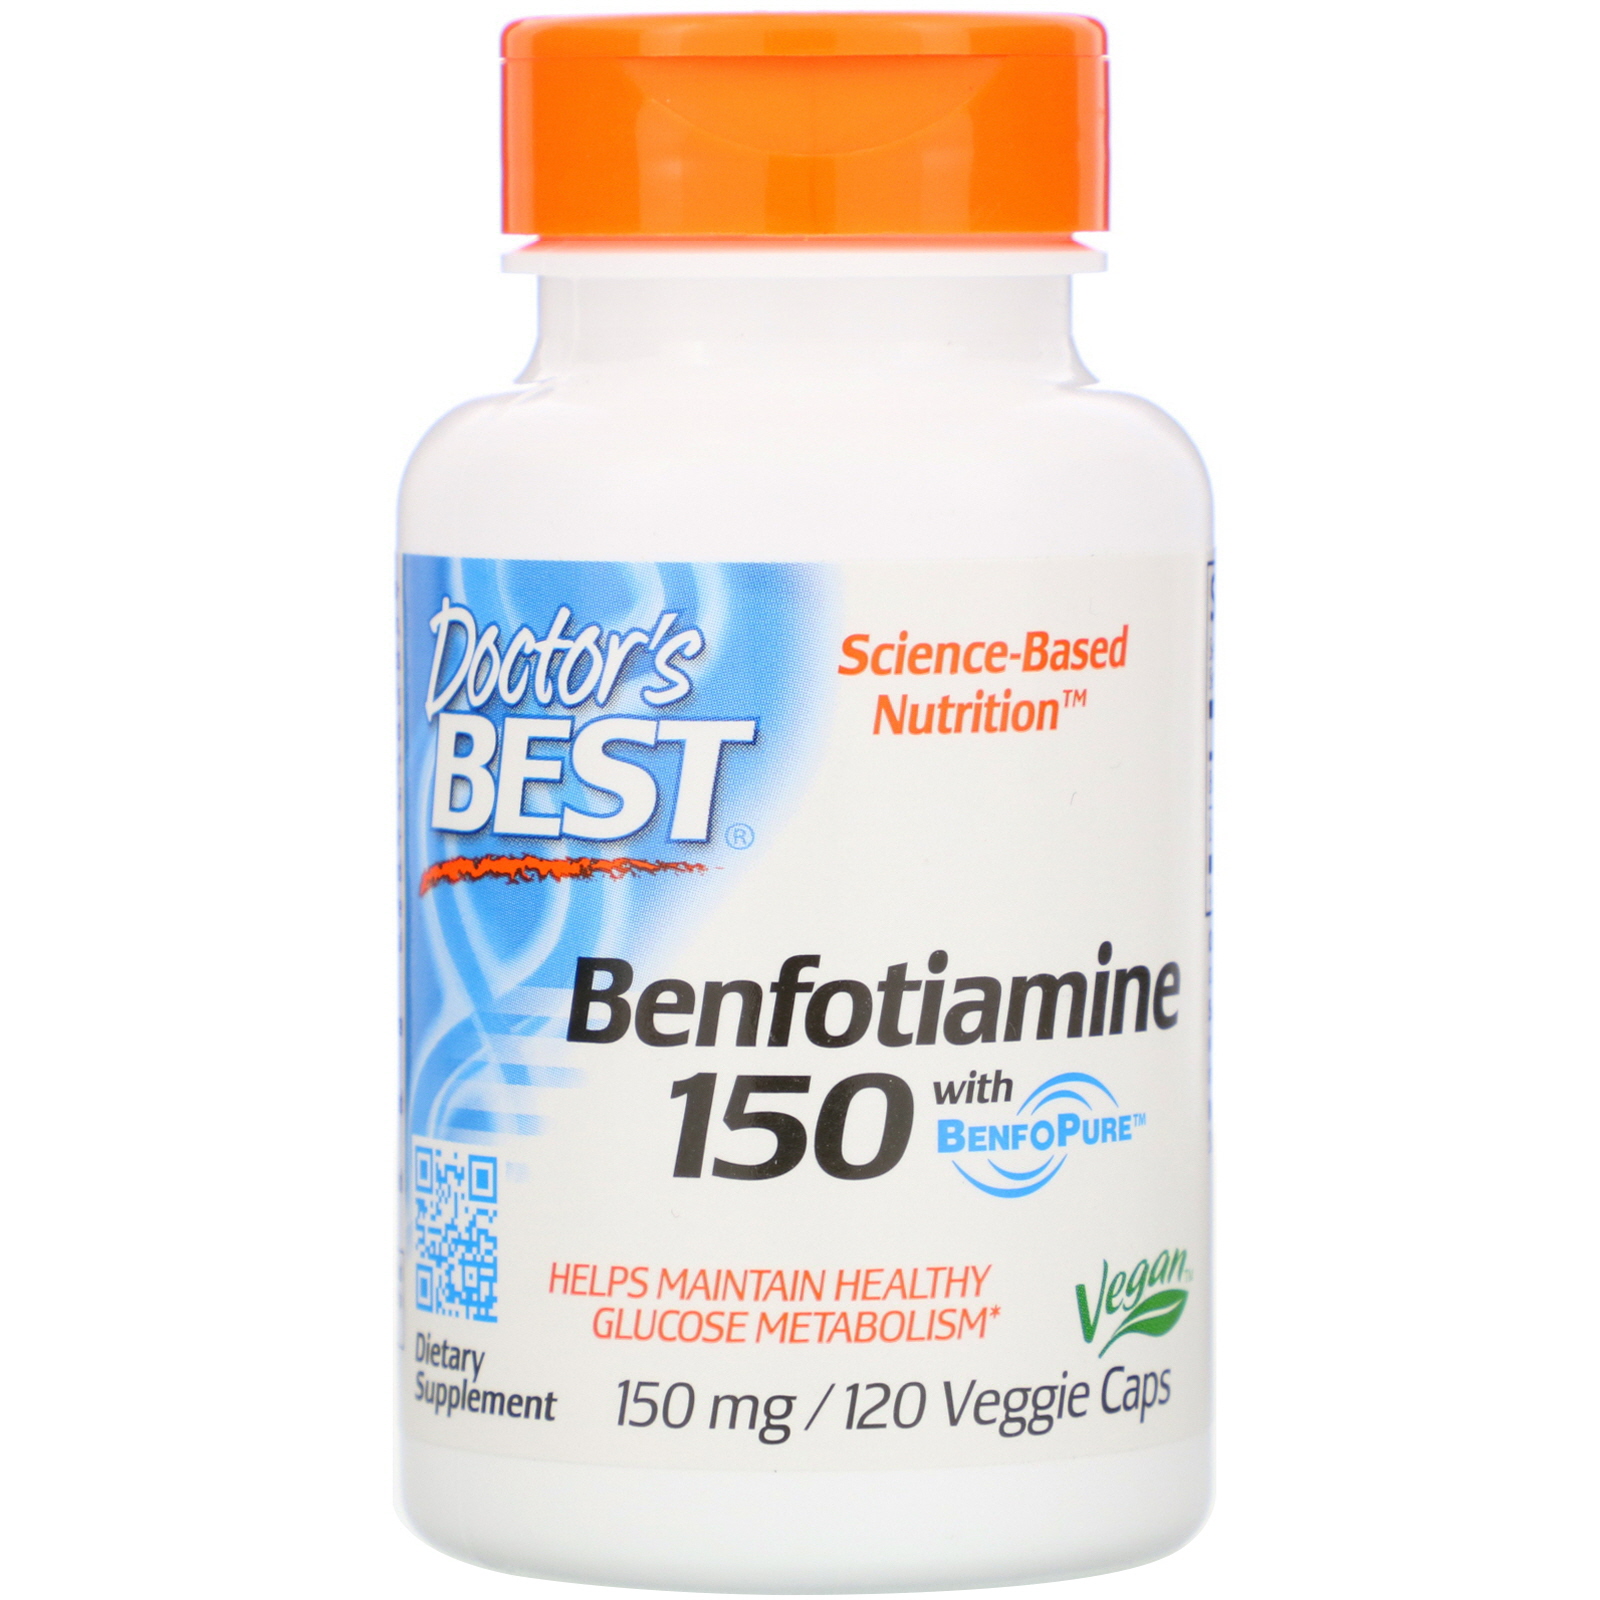 Benfotiamine with BenfoPure 150mg, 120 Capsules - Doctor's Best .